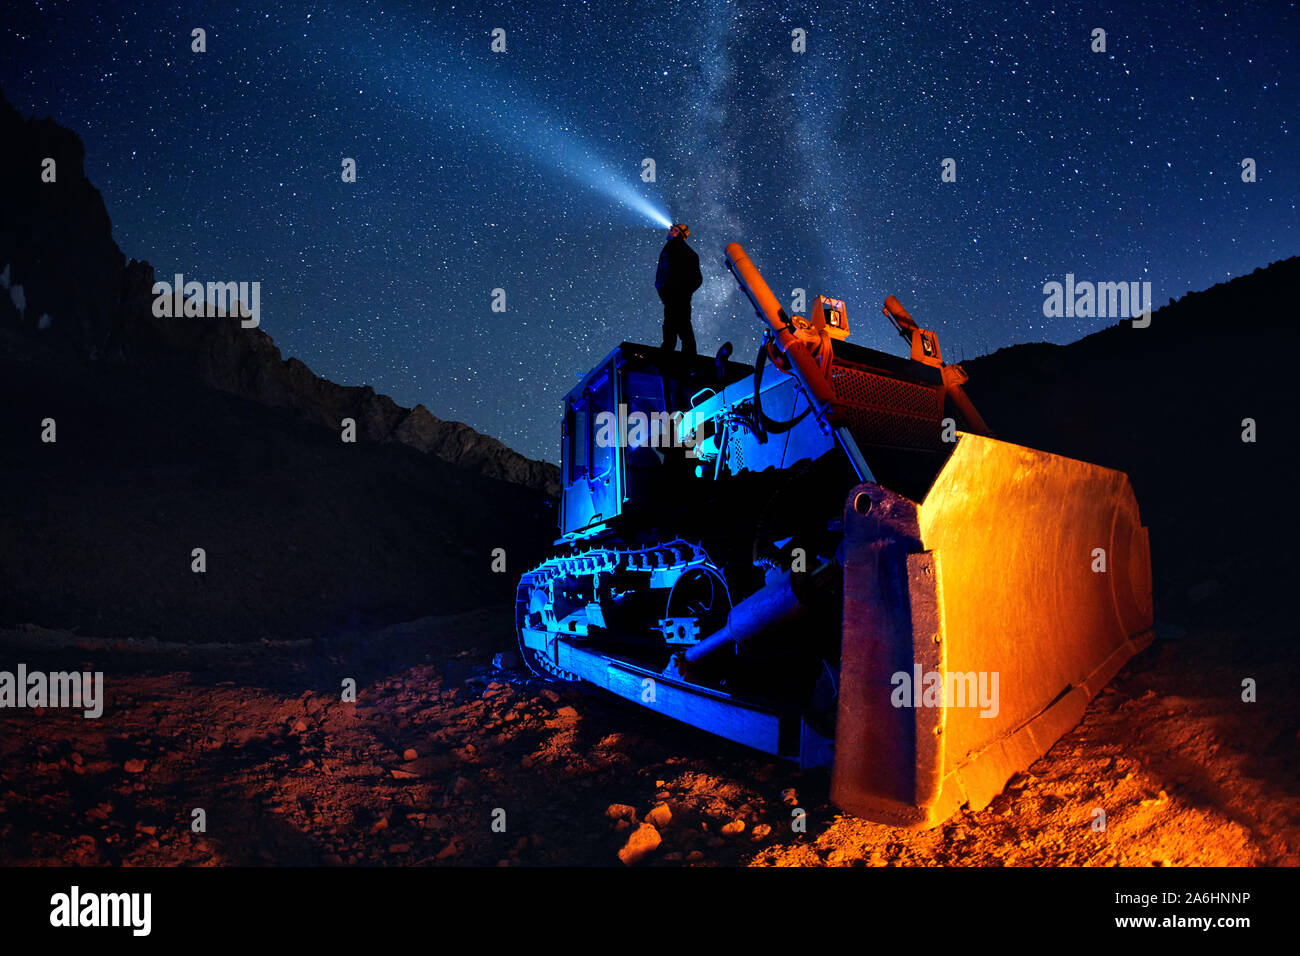 Man on bulldozer with head lamp under Milky Way view at night starry sky in the mountains Stock Photo